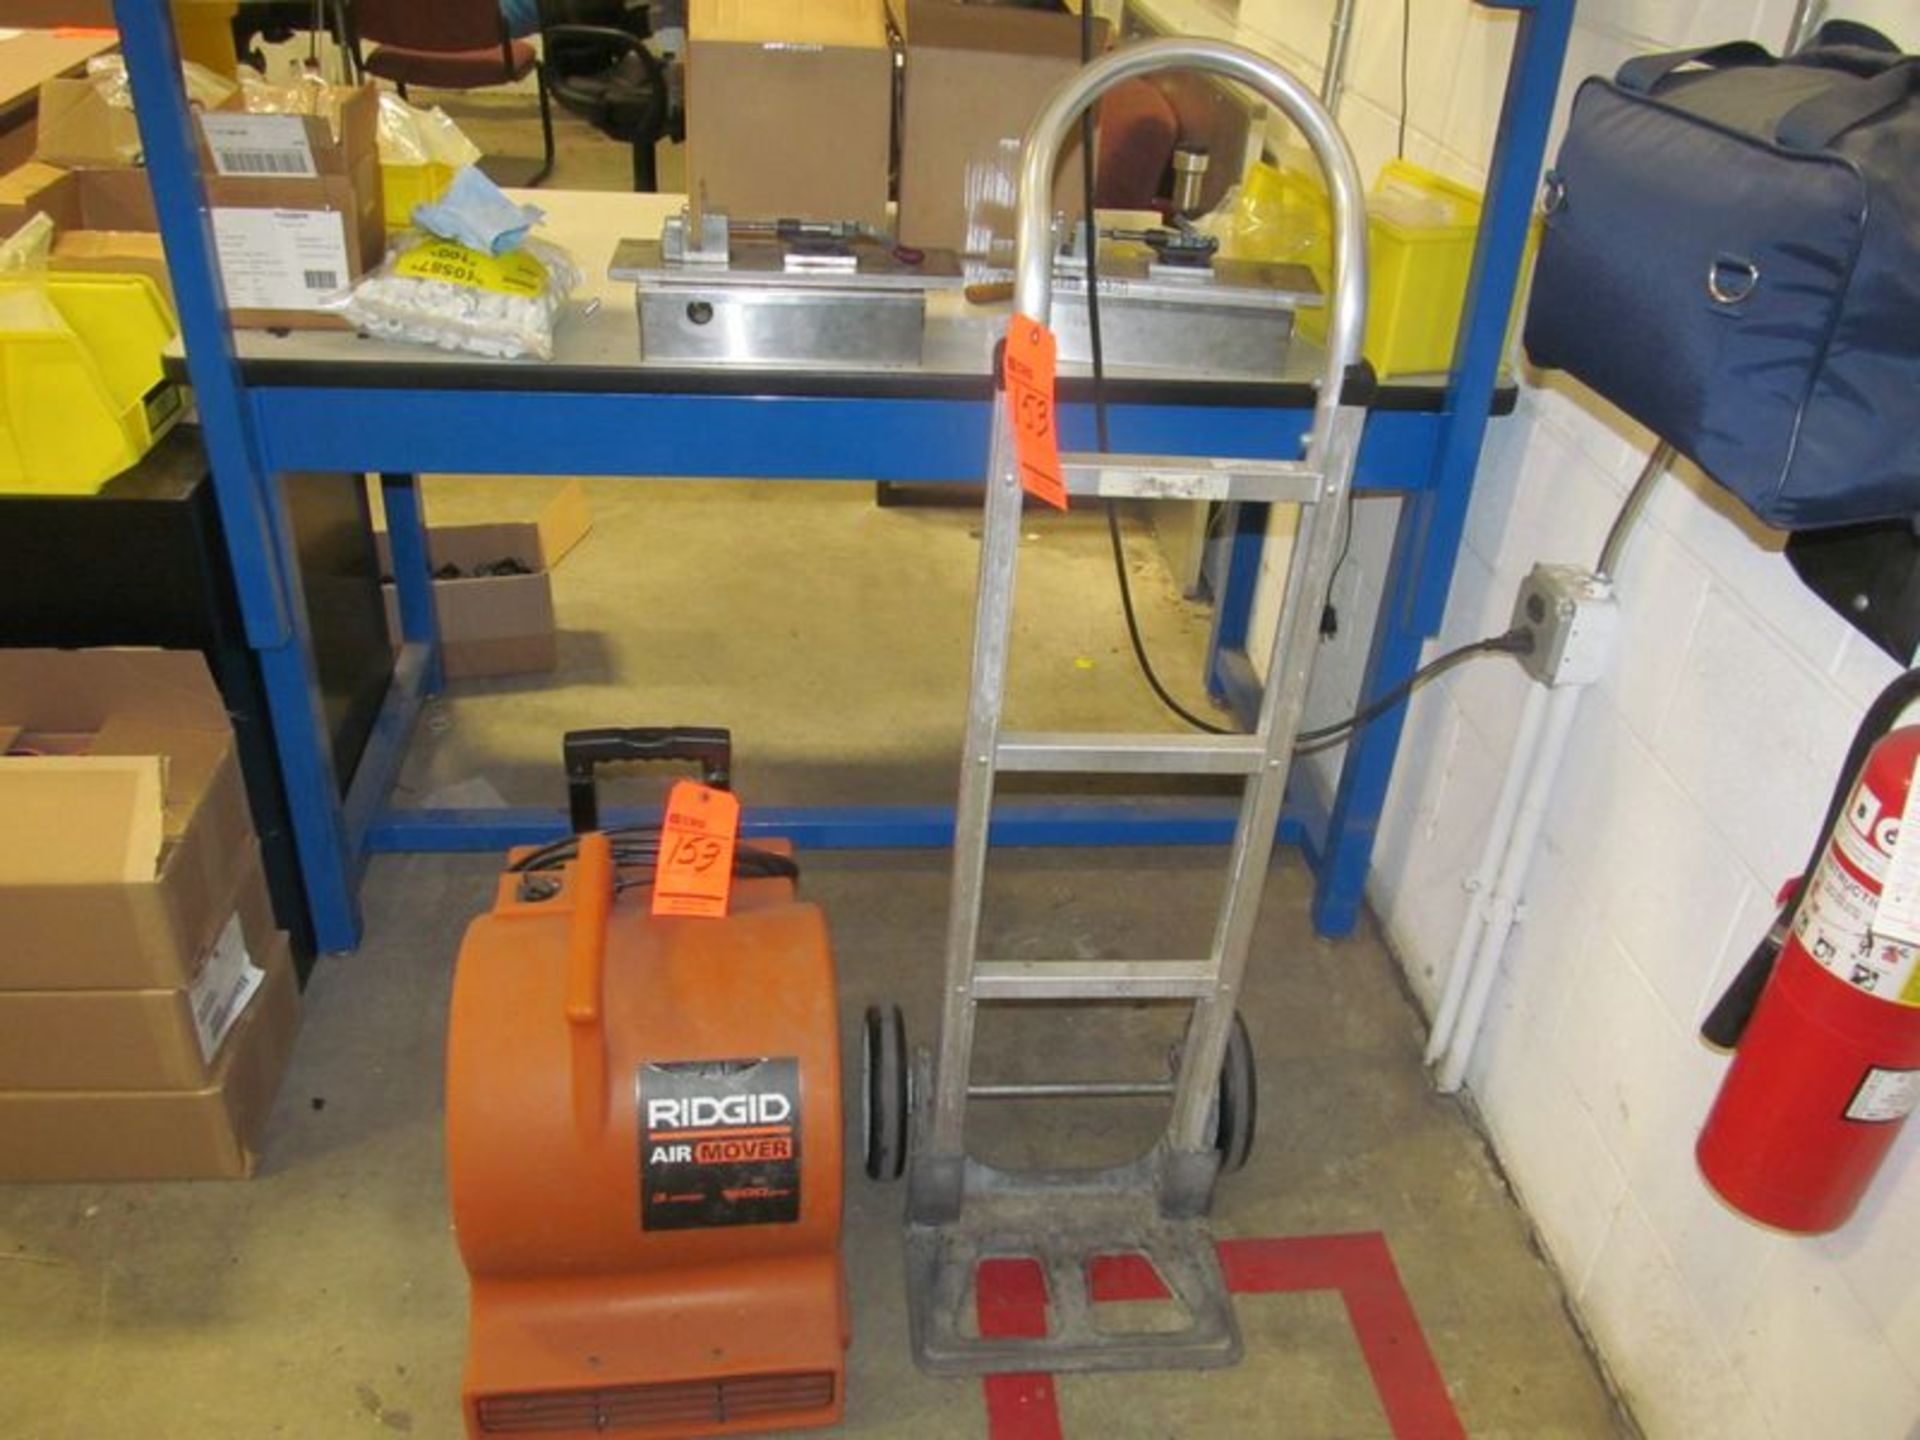 Lot includes (1) Ridgid electric floor dryer blower and (1) Magliner 2-wheel hand truck